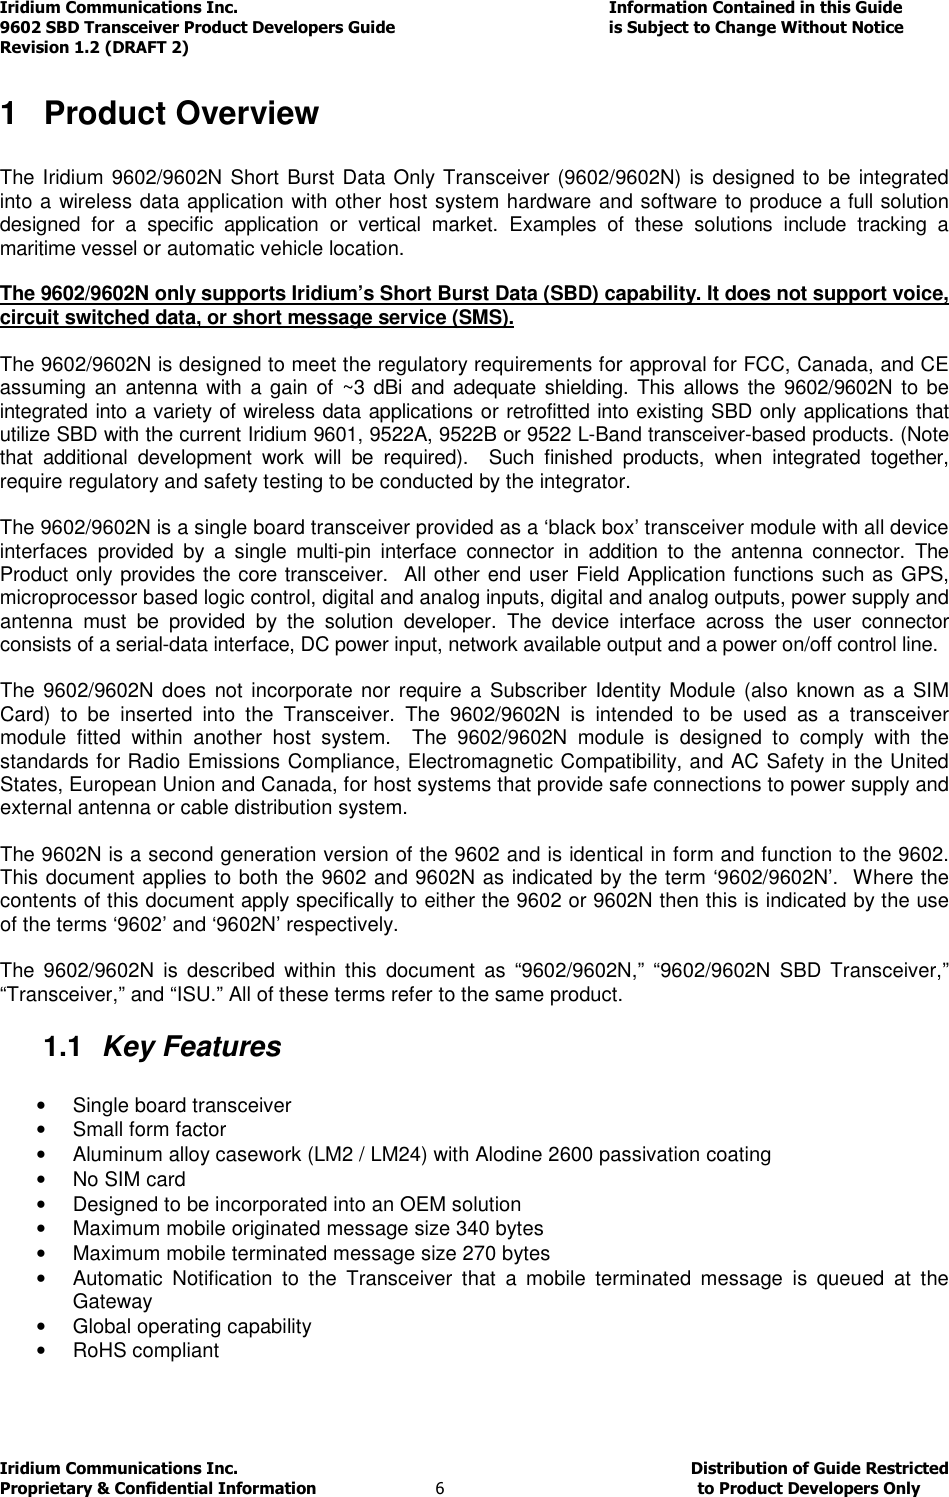 Iridium Communications Inc.                                      Information Contained in this Guide  9602 SBD Transceiver Product Developers Guide                                             is Subject to Change Without Notice  Revision 1.2 (DRAFT 2) Iridium Communications Inc.                                           Distribution of Guide Restricted Proprietary &amp; Confidential Information                         6                                                  to Product Developers Only           1  Product Overview  The Iridium 9602/9602N Short Burst Data Only Transceiver (9602/9602N) is designed to be integrated into a wireless data application with other host system hardware and software to produce a full solution designed  for  a  specific  application  or  vertical  market.  Examples  of  these  solutions  include  tracking  a maritime vessel or automatic vehicle location.   The 9602/9602N only supports Iridium’s Short Burst Data (SBD) capability. It does not support voice, circuit switched data, or short message service (SMS).  The 9602/9602N is designed to meet the regulatory requirements for approval for FCC, Canada, and CE assuming an  antenna with  a  gain  of  ~3 dBi and adequate shielding. This allows the 9602/9602N to  be integrated into a variety of wireless data applications or retrofitted into existing SBD only applications that utilize SBD with the current Iridium 9601, 9522A, 9522B or 9522 L-Band transceiver-based products. (Note that  additional  development  work  will  be  required).    Such  finished  products,  when  integrated  together, require regulatory and safety testing to be conducted by the integrator.  The 9602/9602N is a single board transceiver provided as a ‘black box’ transceiver module with all device interfaces  provided  by  a  single  multi-pin  interface  connector  in  addition  to  the  antenna  connector.  The Product only provides the core transceiver.  All other end user Field Application functions such as GPS, microprocessor based logic control, digital and analog inputs, digital and analog outputs, power supply and antenna  must  be  provided  by  the  solution  developer.  The  device  interface  across  the  user  connector consists of a serial-data interface, DC power input, network available output and a power on/off control line.   The 9602/9602N does not  incorporate nor require a  Subscriber Identity Module  (also  known as a  SIM Card)  to  be  inserted  into  the  Transceiver.  The  9602/9602N  is  intended  to  be  used  as  a  transceiver module  fitted  within  another  host  system.    The  9602/9602N  module  is  designed  to  comply  with  the standards for Radio Emissions Compliance, Electromagnetic Compatibility, and AC Safety in the United States, European Union and Canada, for host systems that provide safe connections to power supply and external antenna or cable distribution system.  The 9602N is a second generation version of the 9602 and is identical in form and function to the 9602.  This document applies to both the 9602 and 9602N as indicated by the term ‘9602/9602N’.  Where the contents of this document apply specifically to either the 9602 or 9602N then this is indicated by the use of the terms ‘9602’ and ‘9602N’ respectively.  The  9602/9602N  is  described  within  this  document  as  “9602/9602N,”  “9602/9602N  SBD  Transceiver,” “Transceiver,” and “ISU.” All of these terms refer to the same product. 1.1  Key Features  •  Single board transceiver •  Small form factor •  Aluminum alloy casework (LM2 / LM24) with Alodine 2600 passivation coating •  No SIM card  •  Designed to be incorporated into an OEM solution •  Maximum mobile originated message size 340 bytes  •  Maximum mobile terminated message size 270 bytes  •  Automatic  Notification  to  the  Transceiver  that  a  mobile  terminated  message  is  queued  at  the Gateway •  Global operating capability •  RoHS compliant 